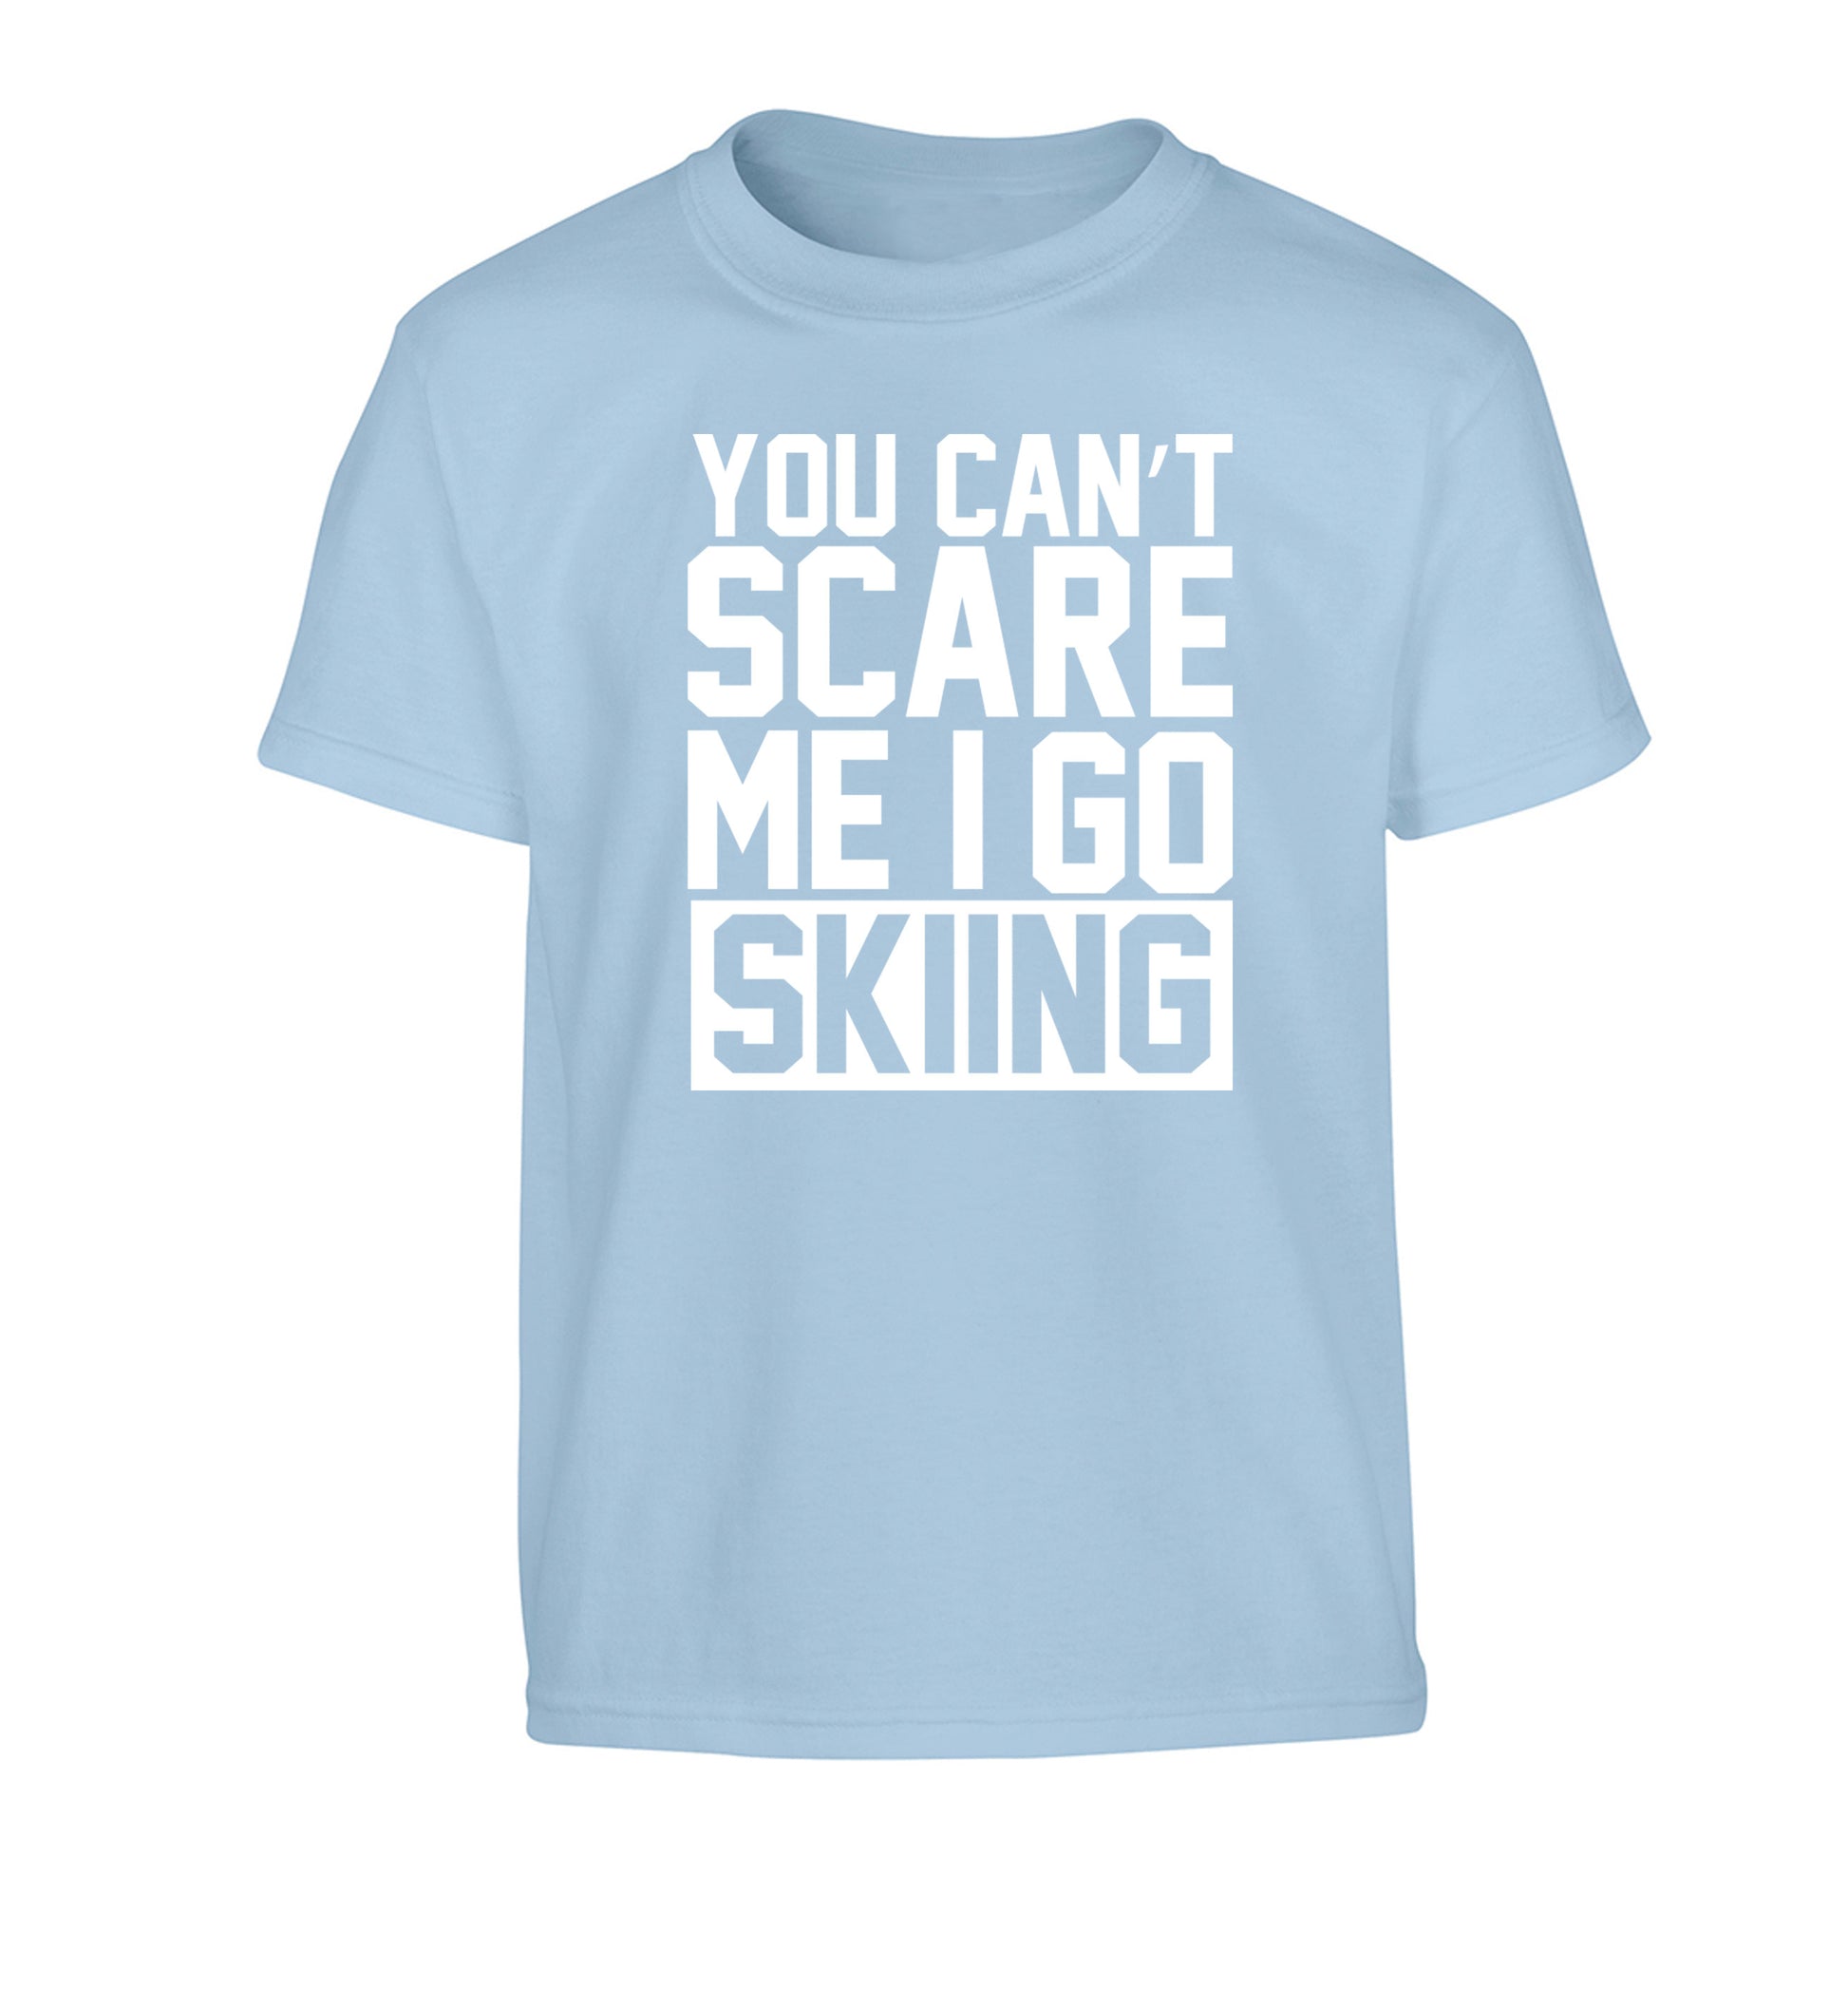 You can't scare me I go skiing Children's light blue Tshirt 12-14 Years